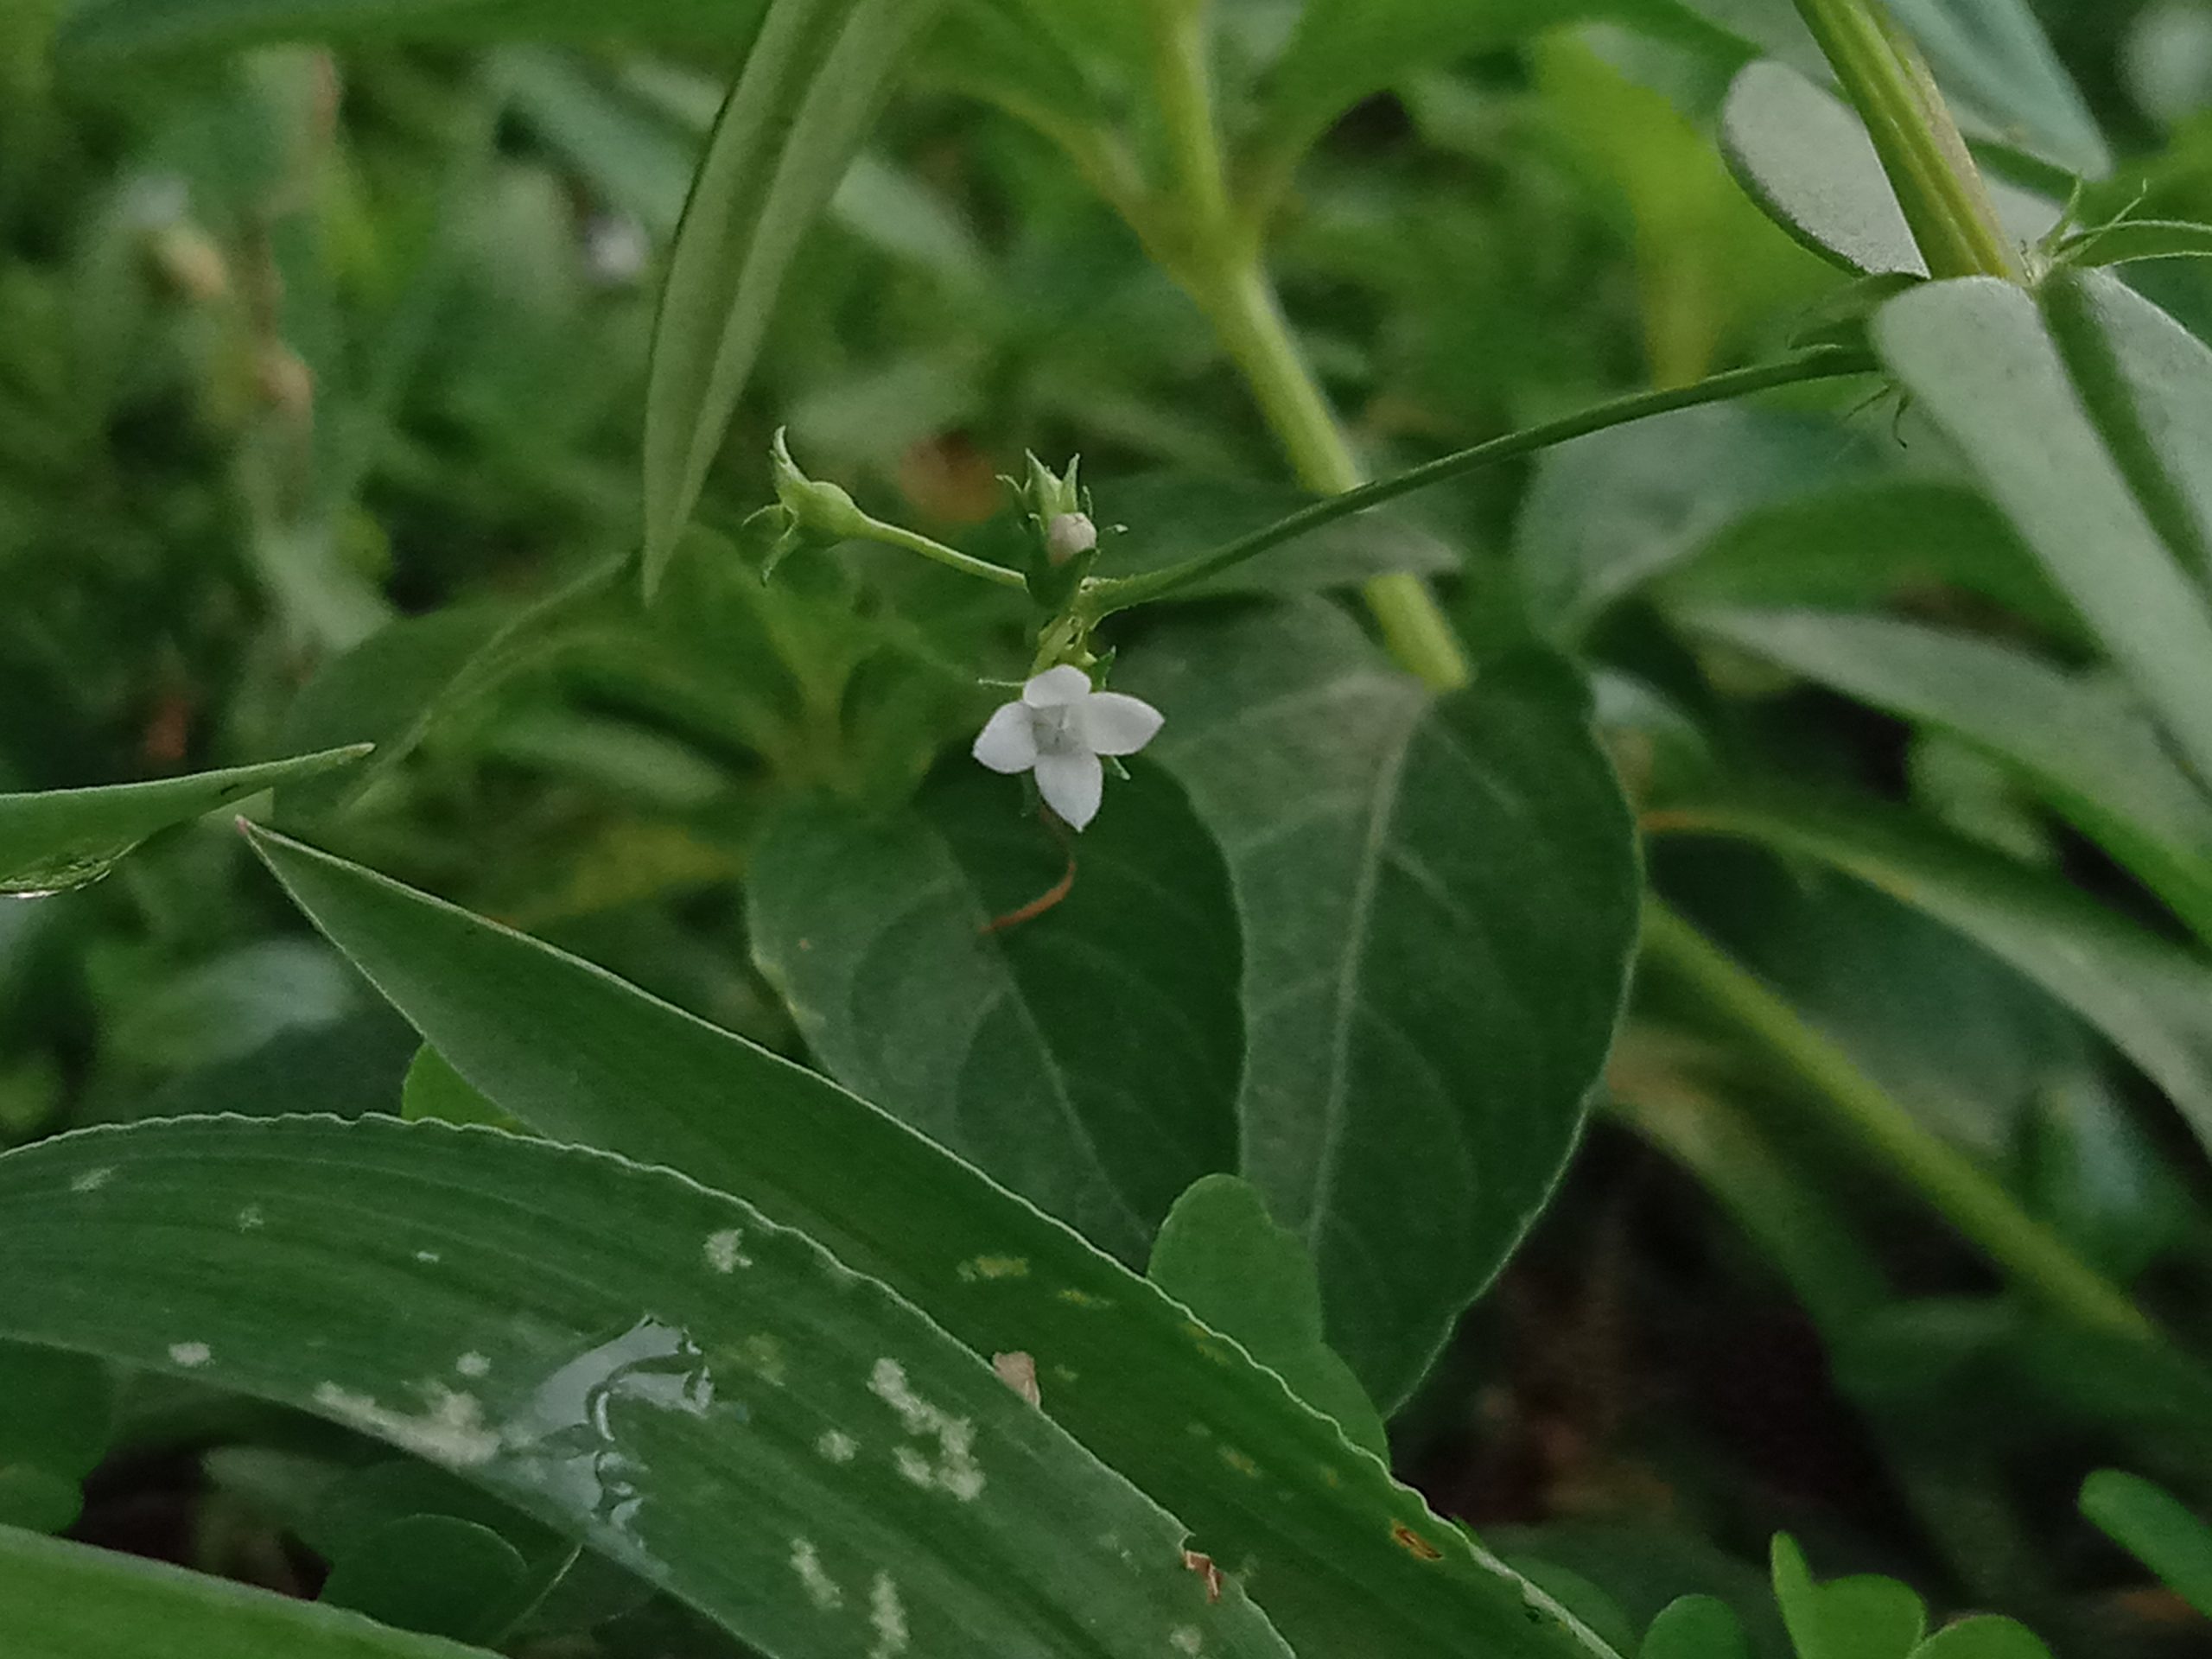 A white flower between green leaves